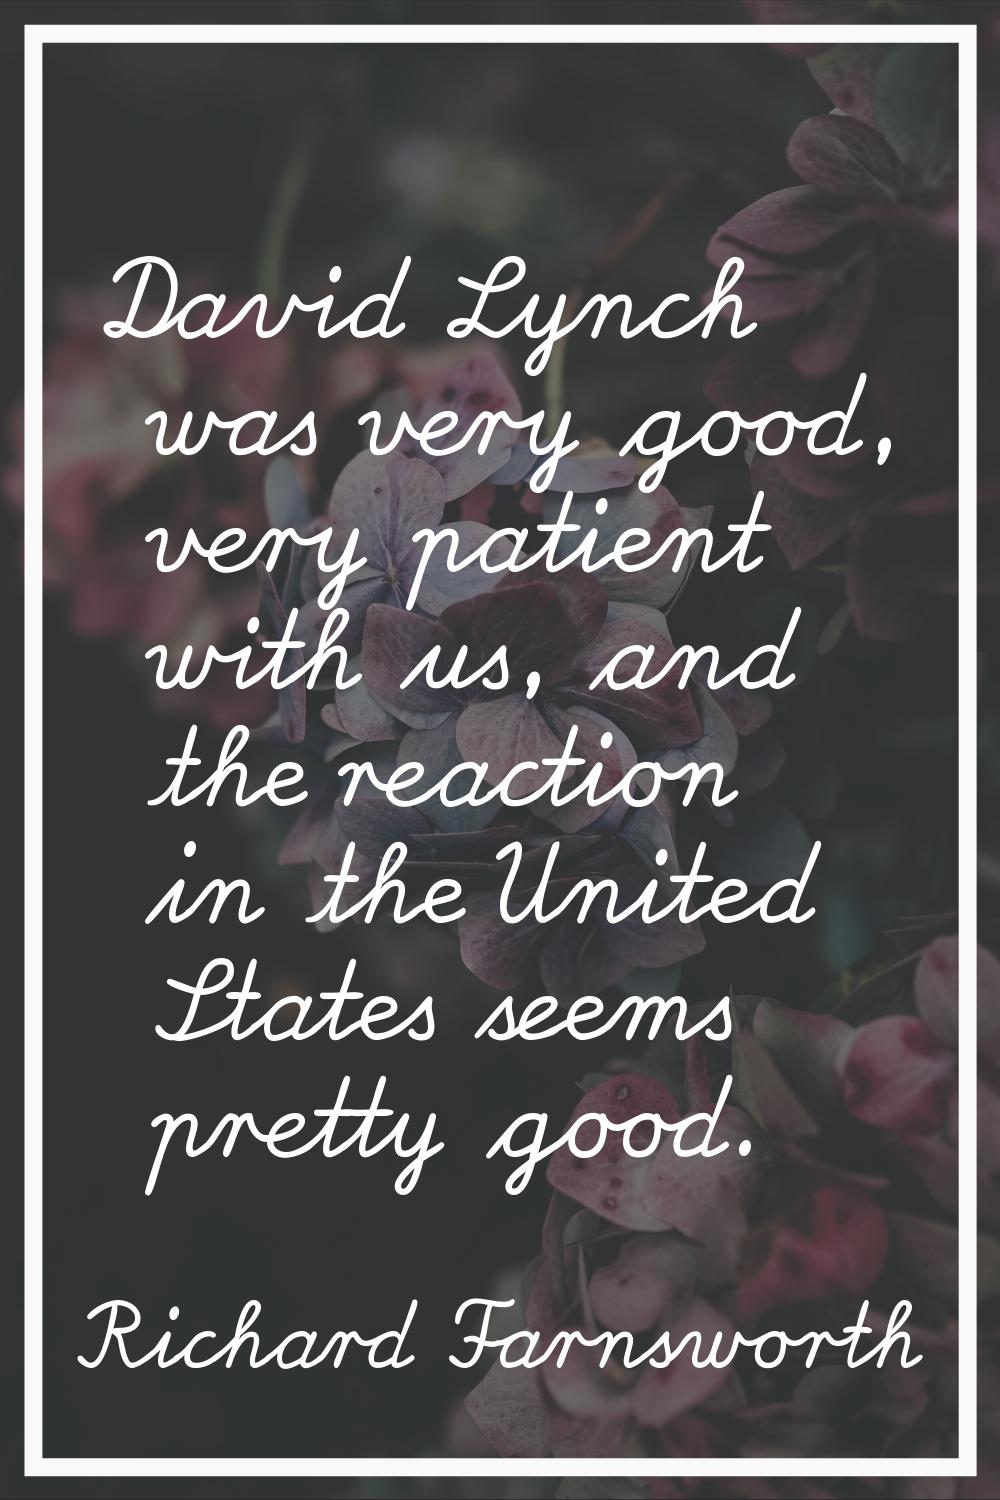 David Lynch was very good, very patient with us, and the reaction in the United States seems pretty